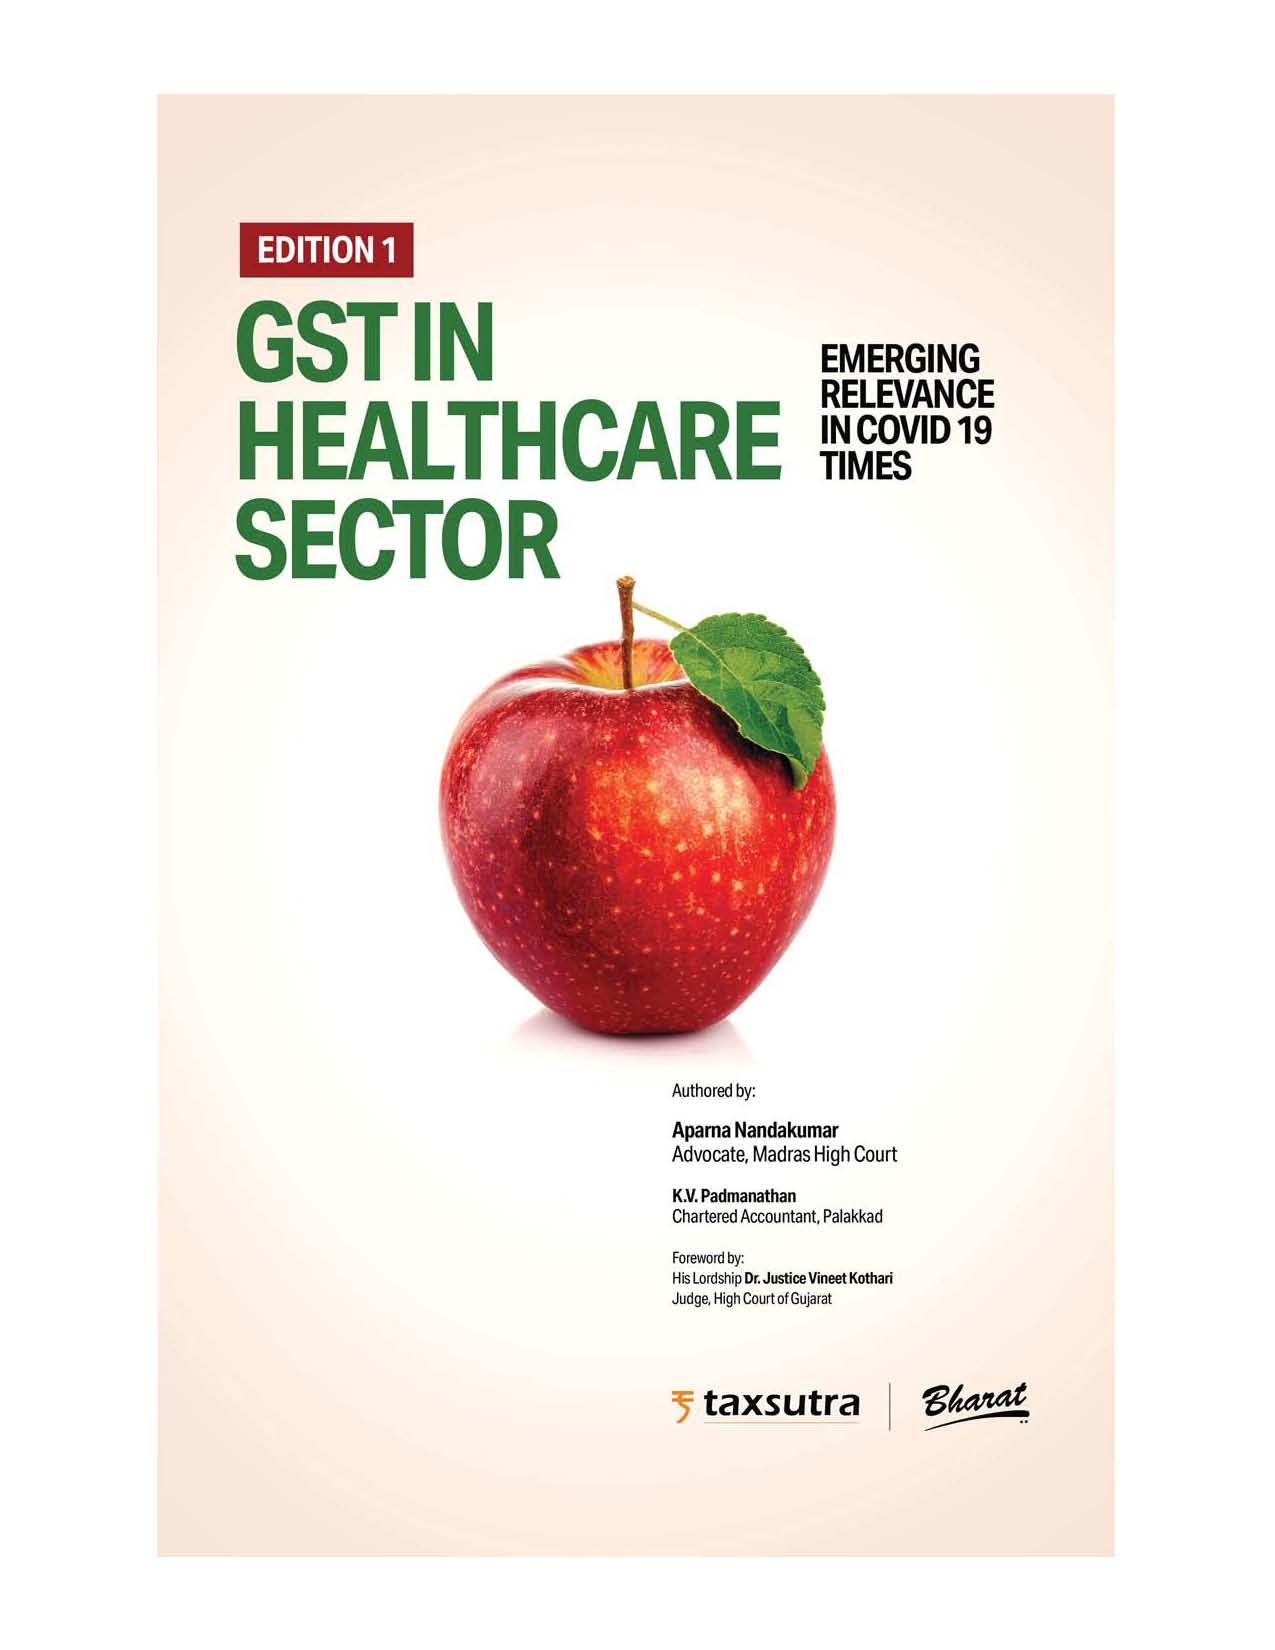 GST in Healthcare Sector (Emerging Relevance in COVID 19 Times)